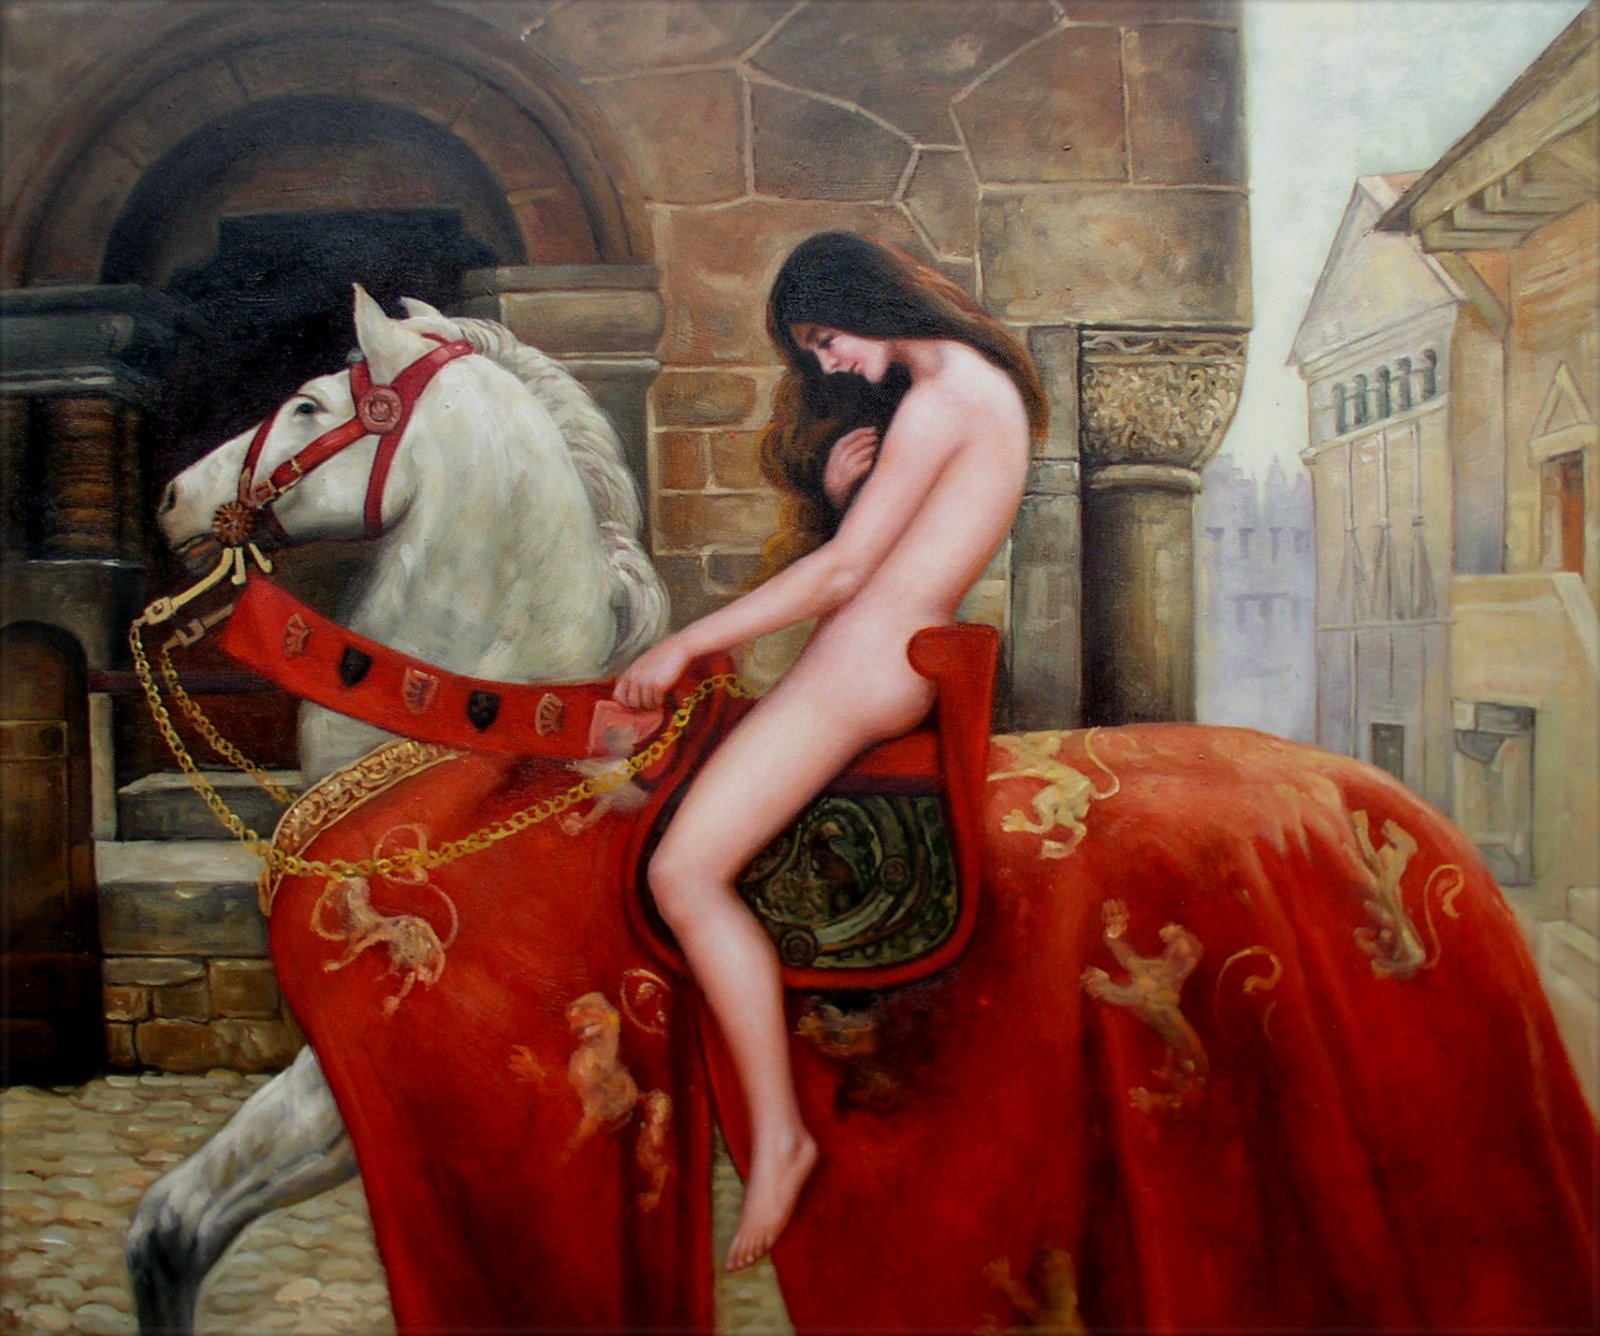 John Collier's Lady Godiva Repro. Quality Hand Painted Oil Painting 20x24in  | eBay